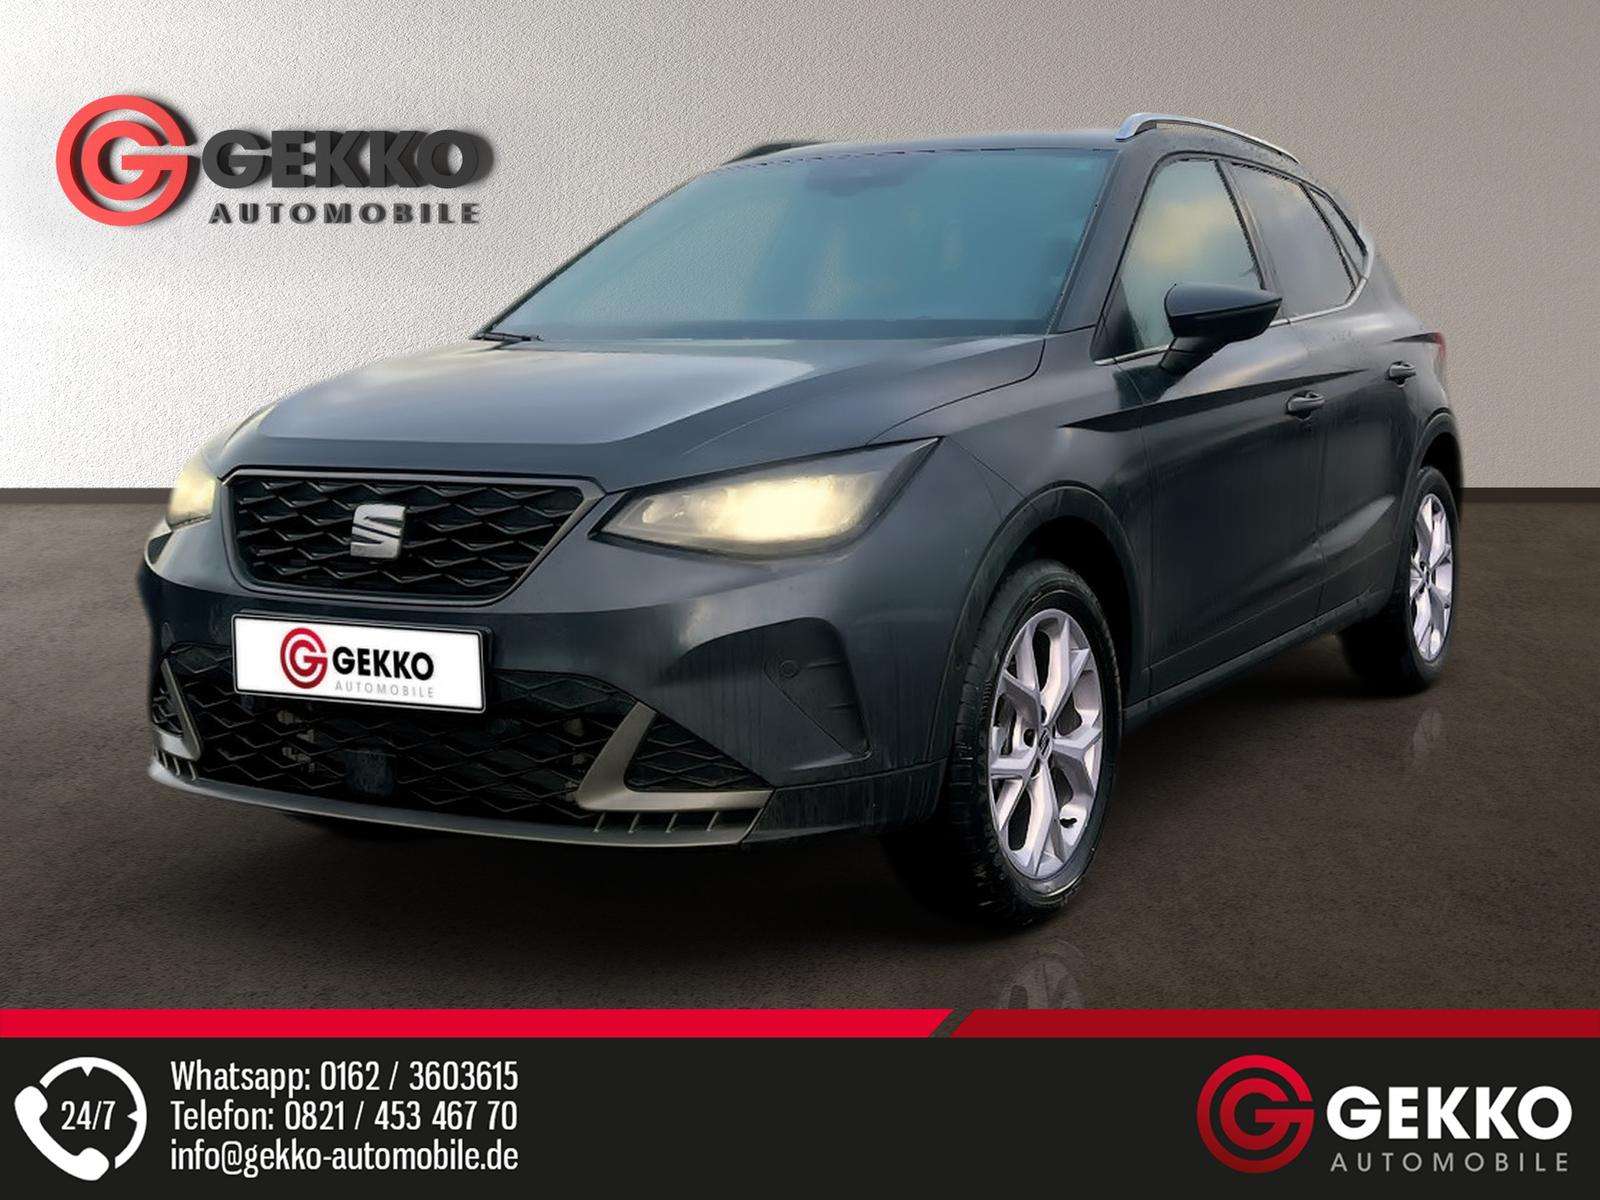 SEAT Arona Off-Road/Pick-up in Grey new in Gersthofen for € 23,779.-